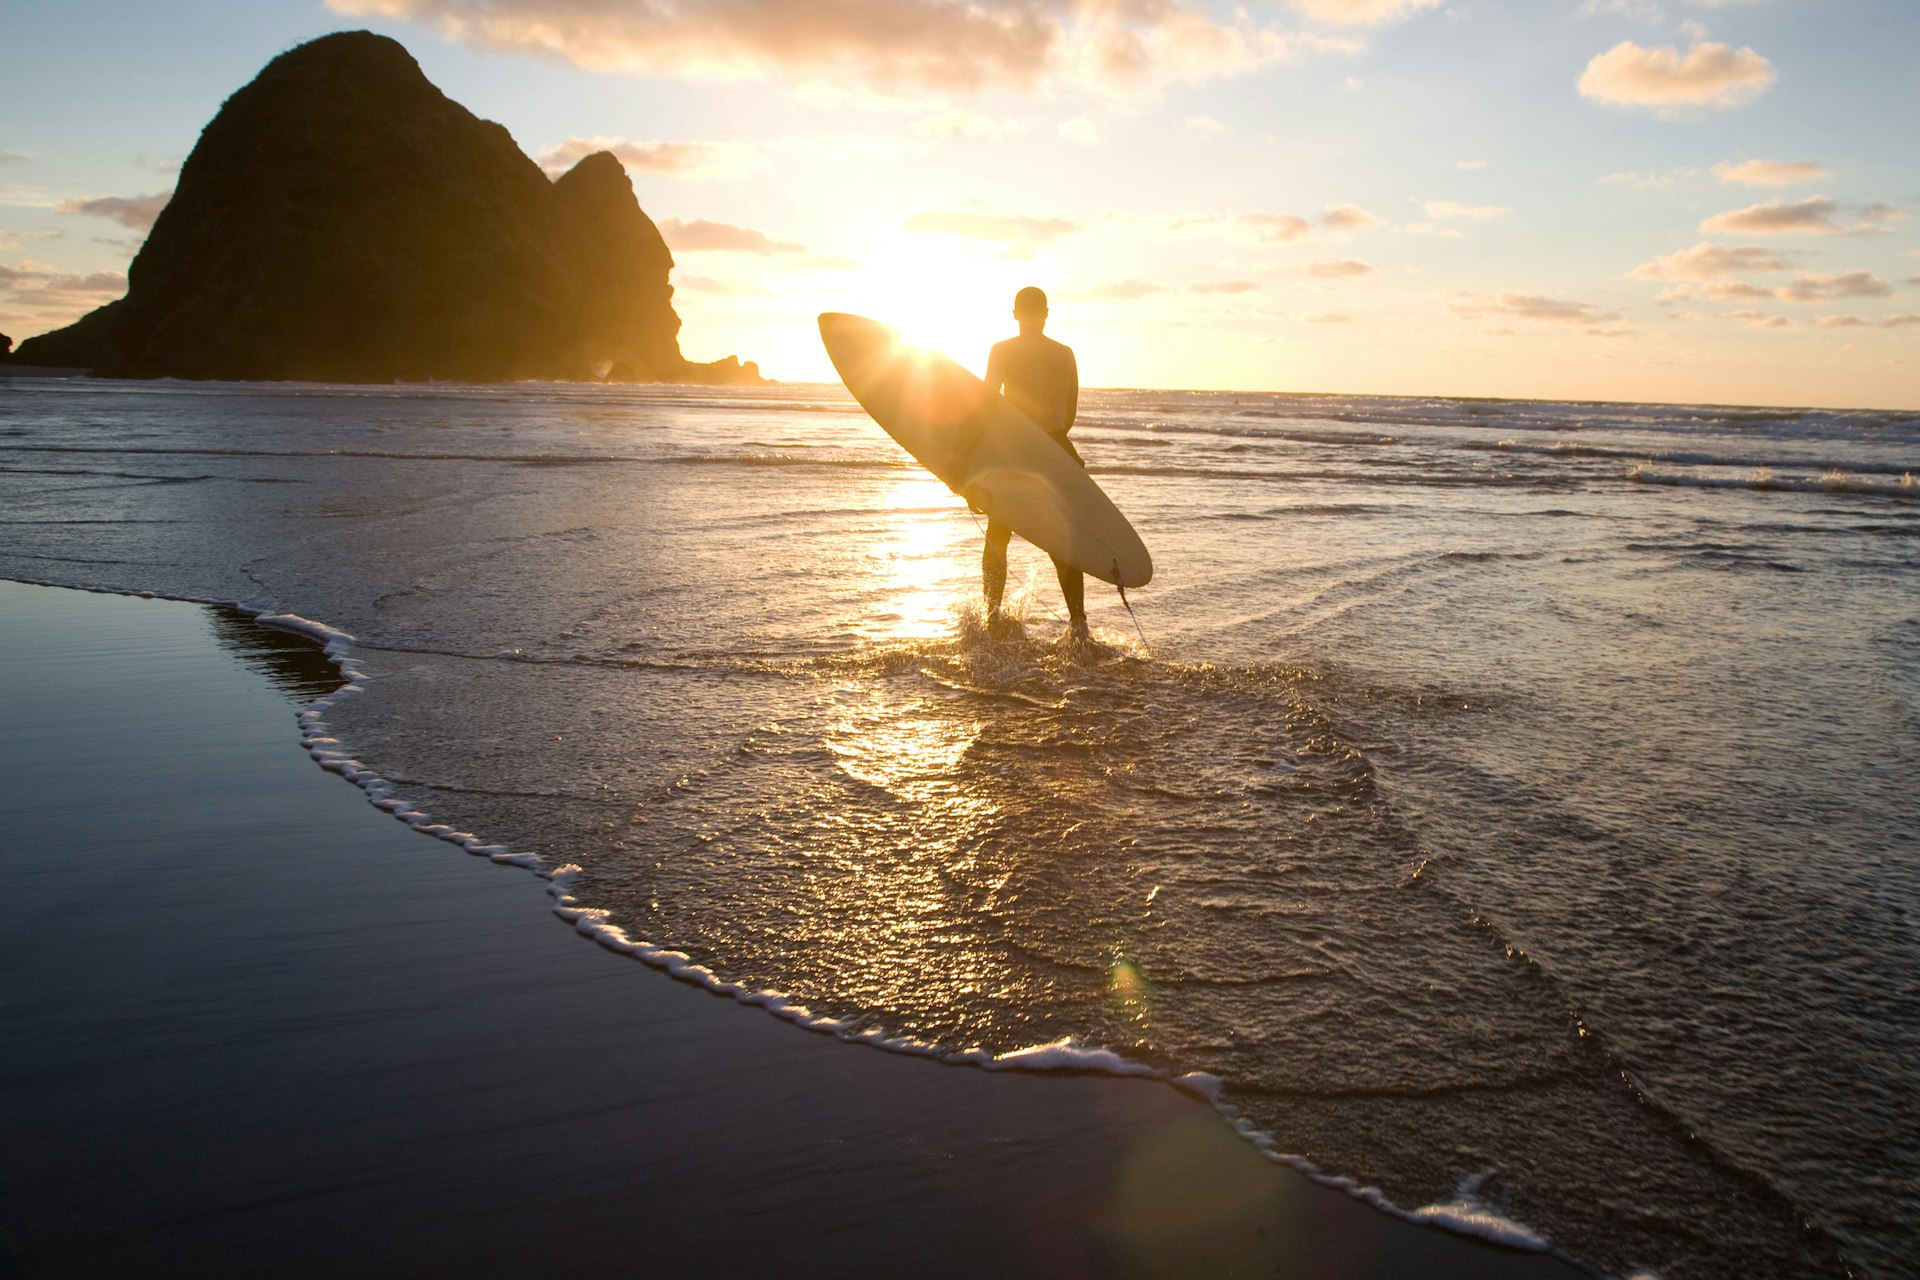 Silhouette of surfer holding surfboard and walking into water at sunset to surf, Piha Beach, Auckland, New Zealand.